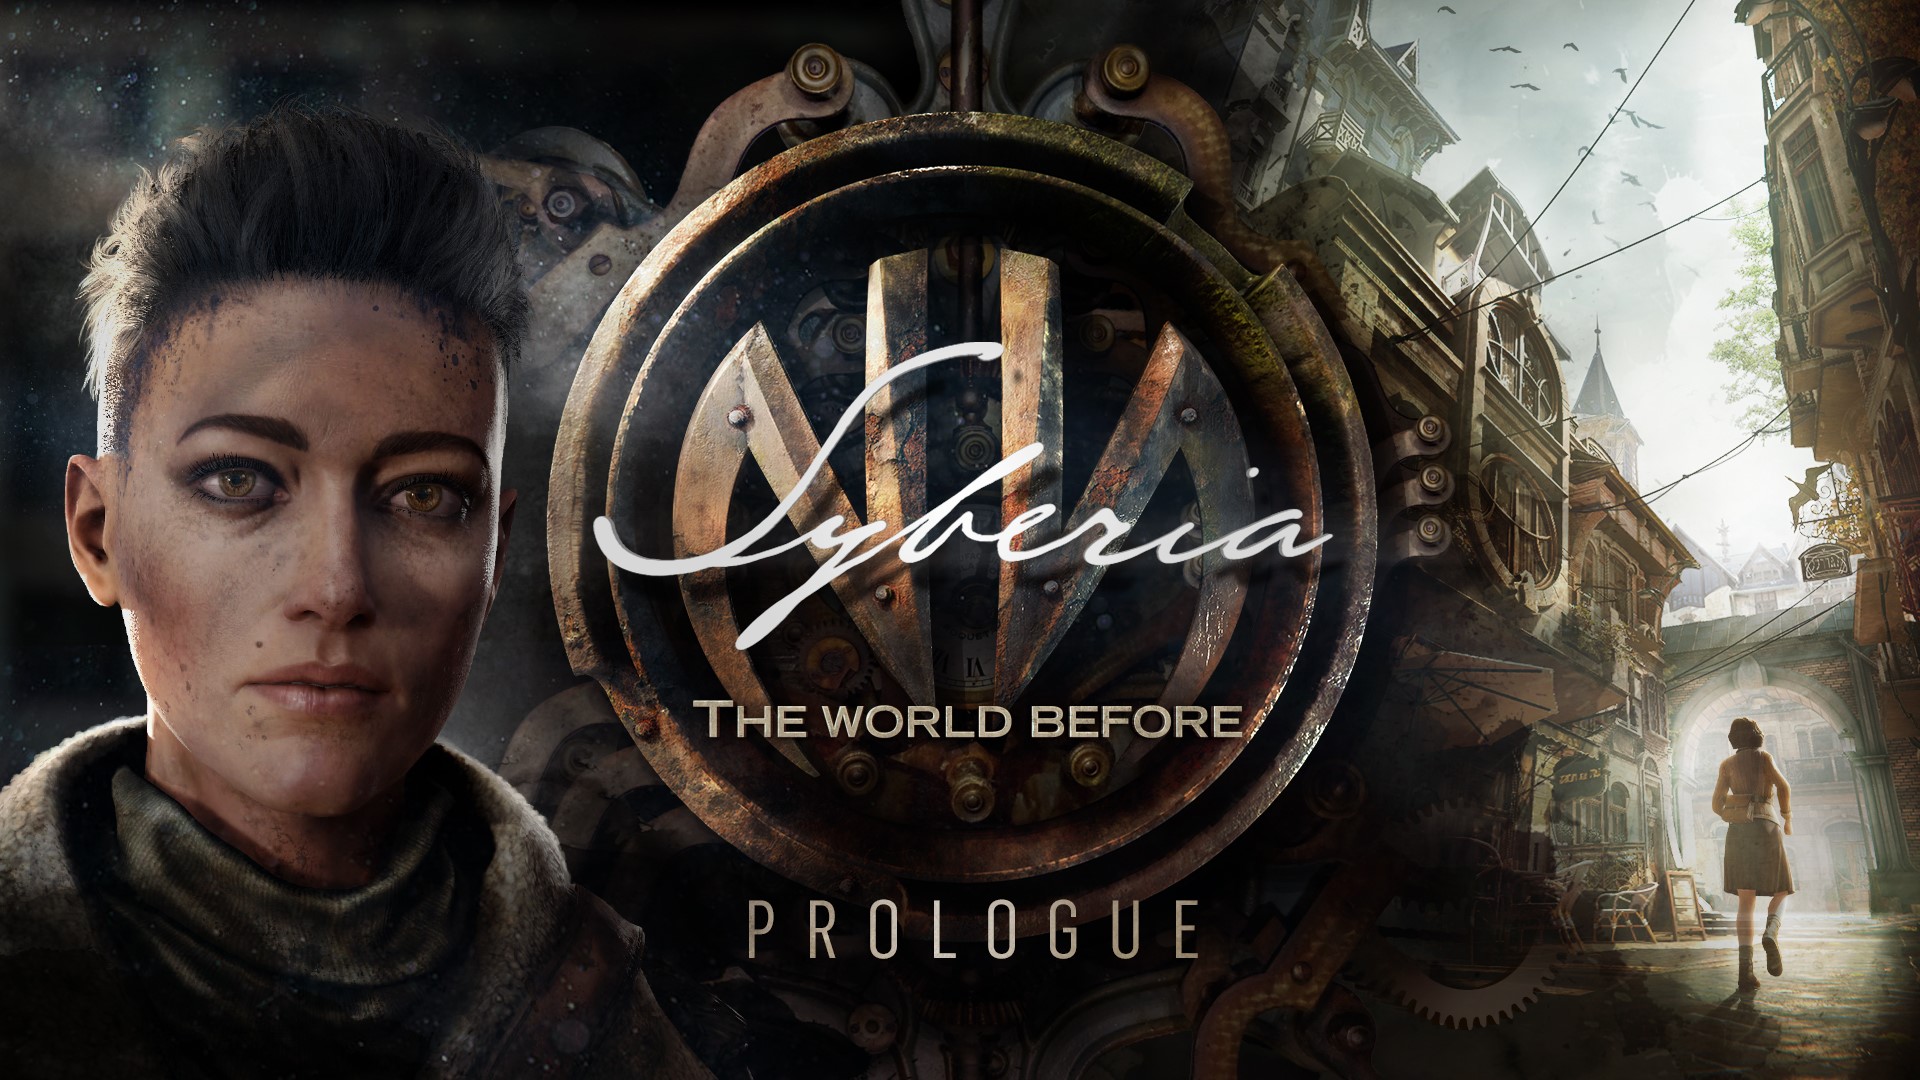 The PC version of Syberia: The World Before will be released on March 18